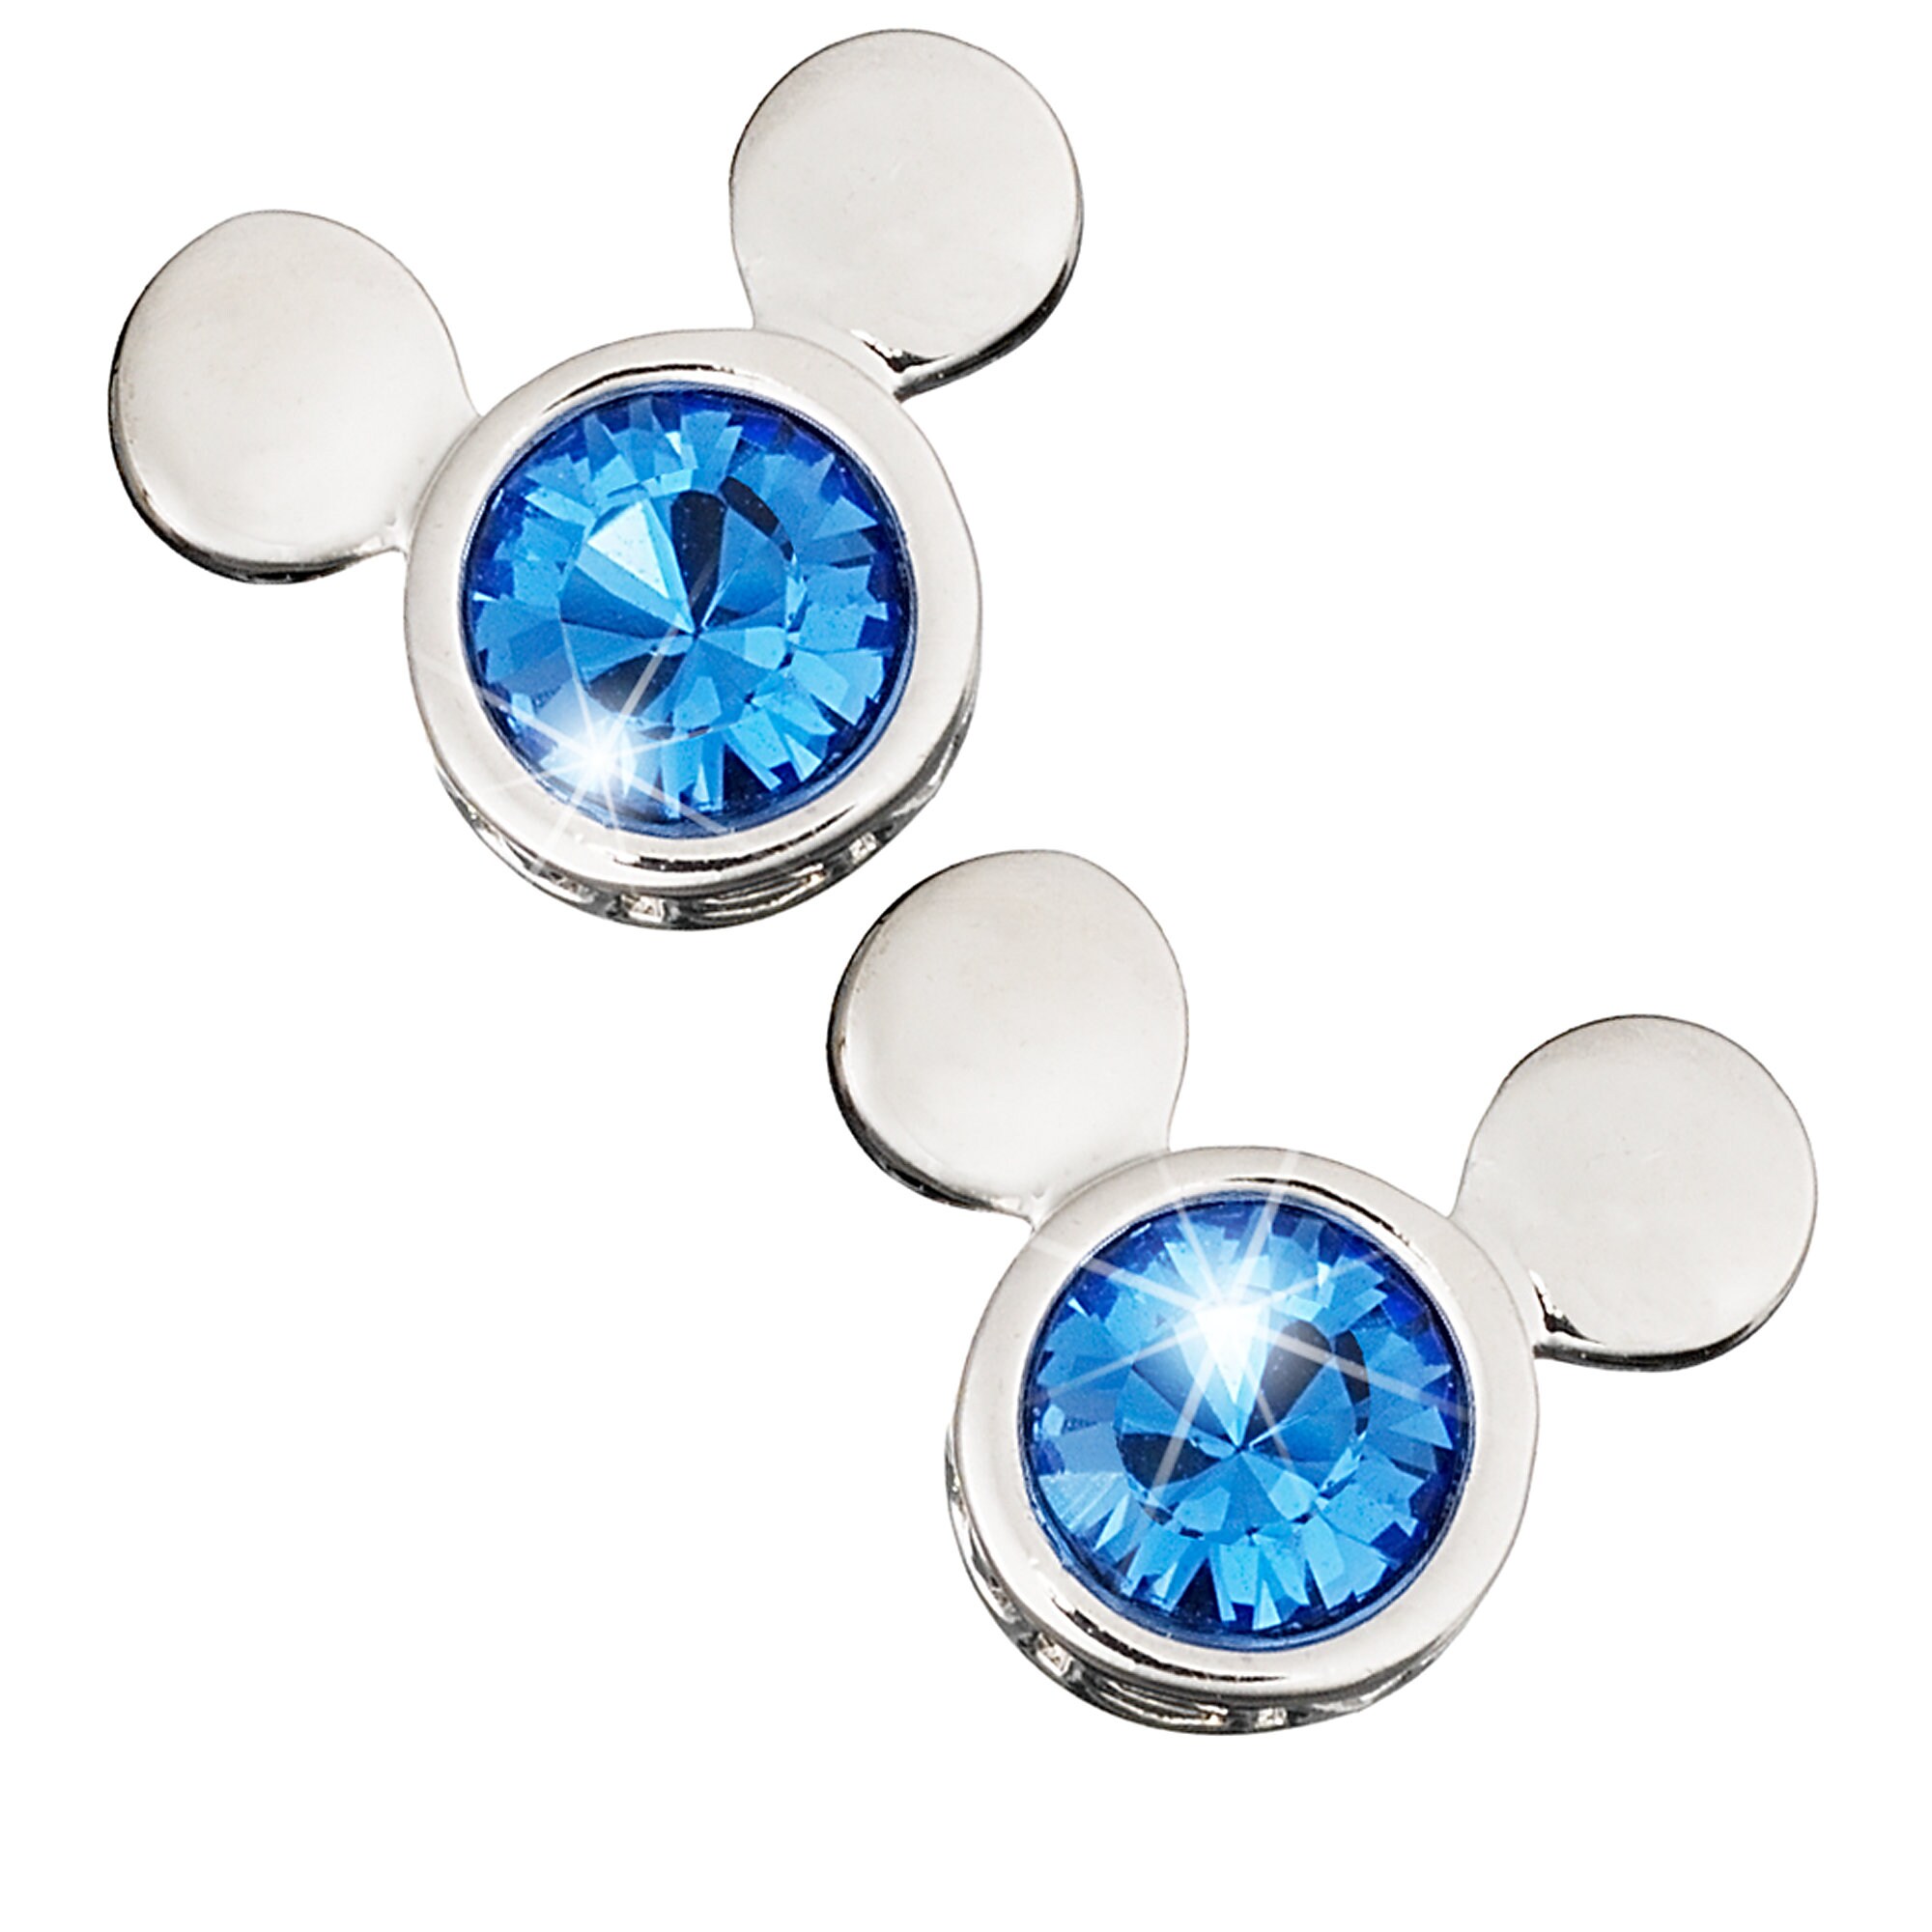 Mickey Mouse Icon Crystal Earrings by Arribas - Blue